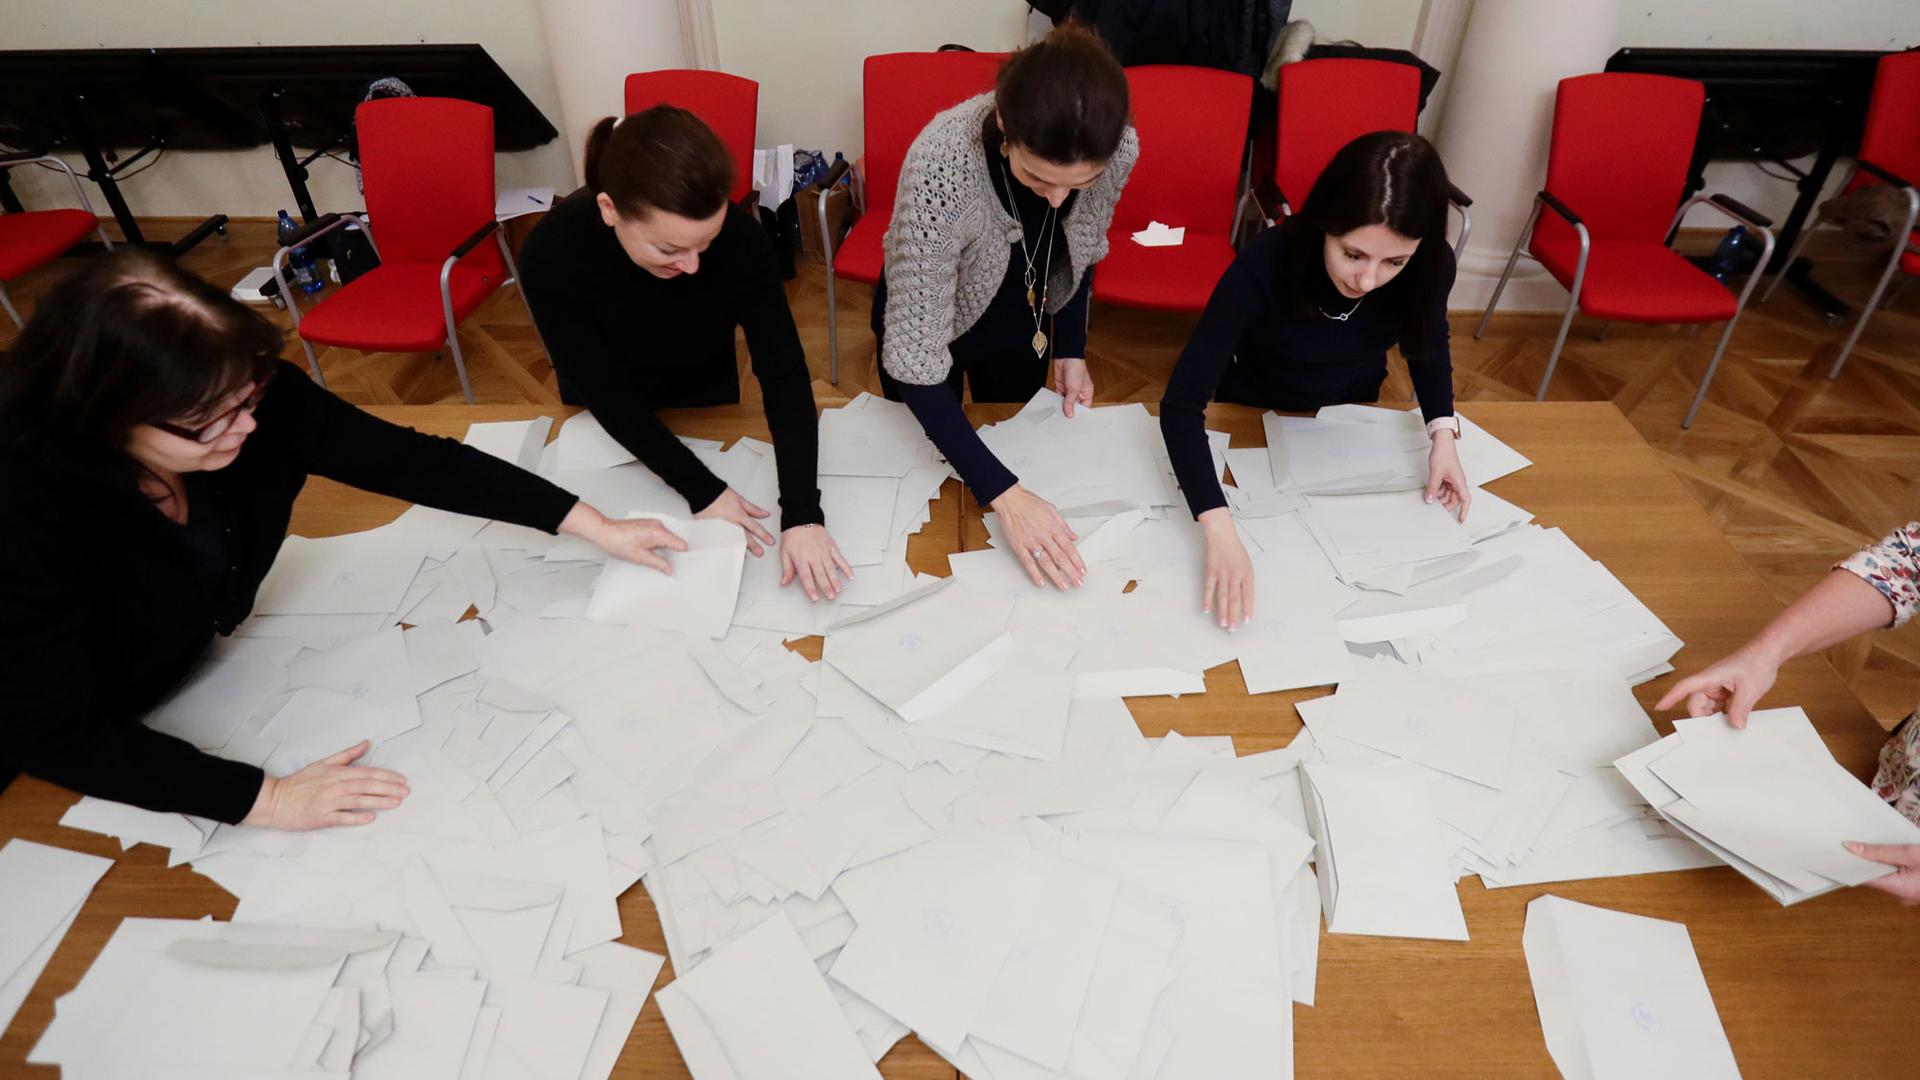 Four people sit at a table covered in white papers, which are ballots, with their hands outstretched as they sort through the pile